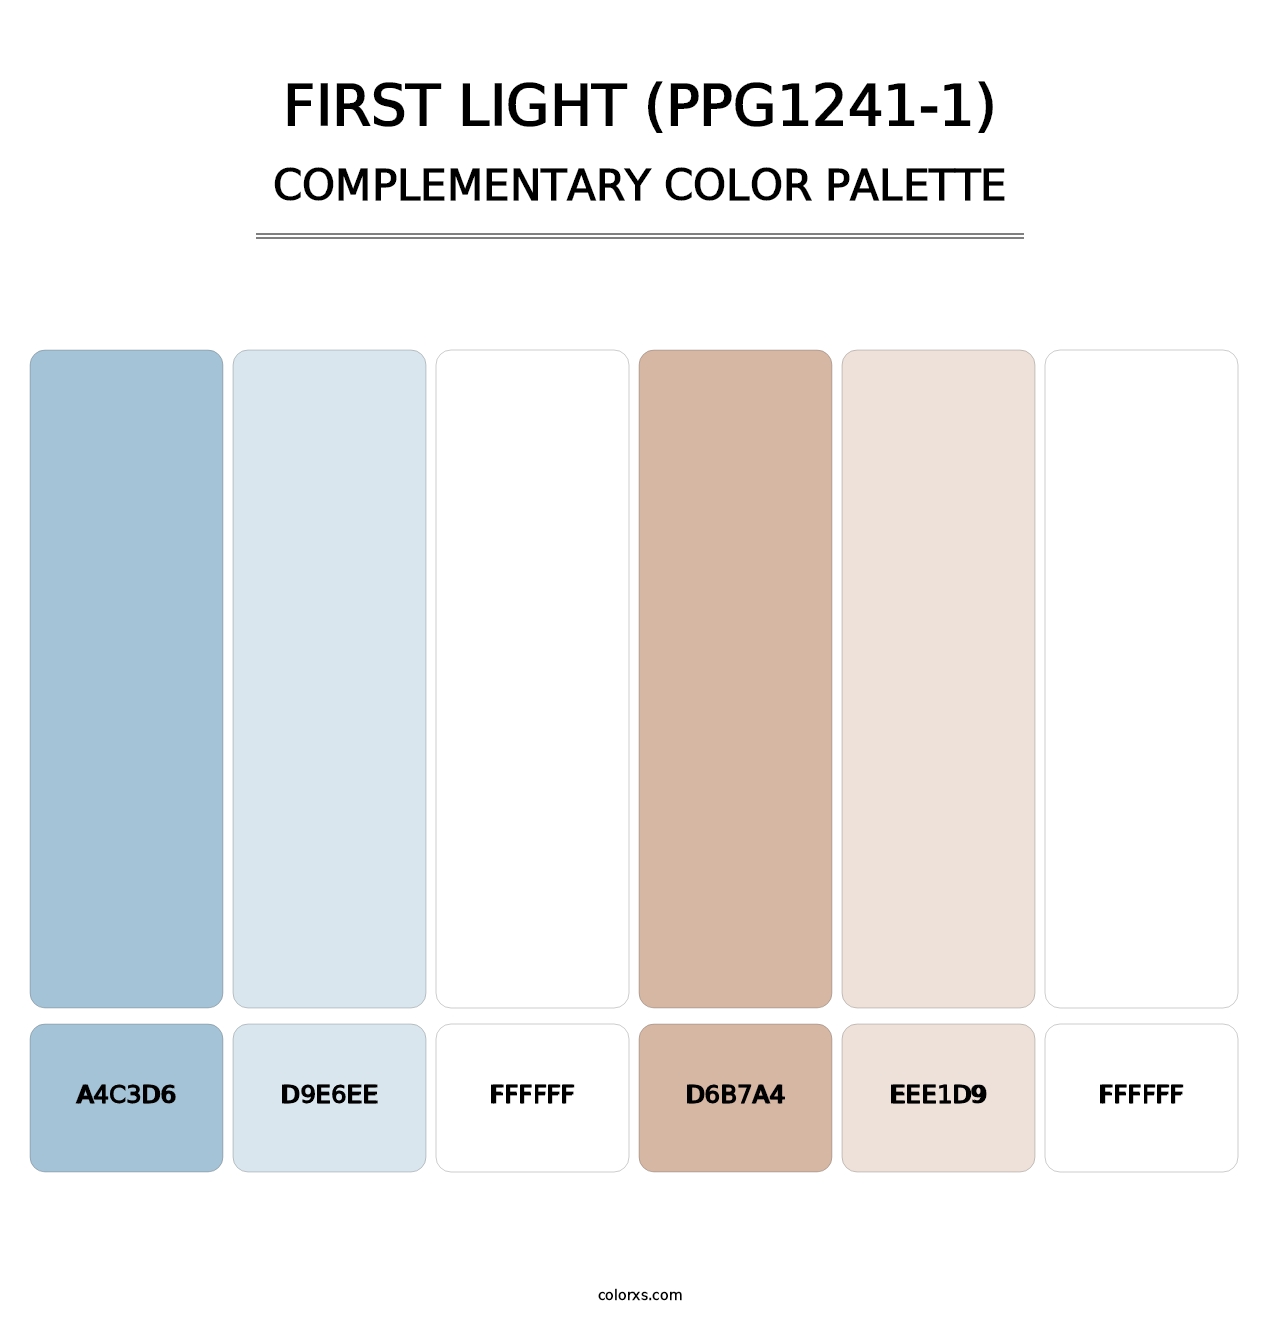 First Light (PPG1241-1) - Complementary Color Palette